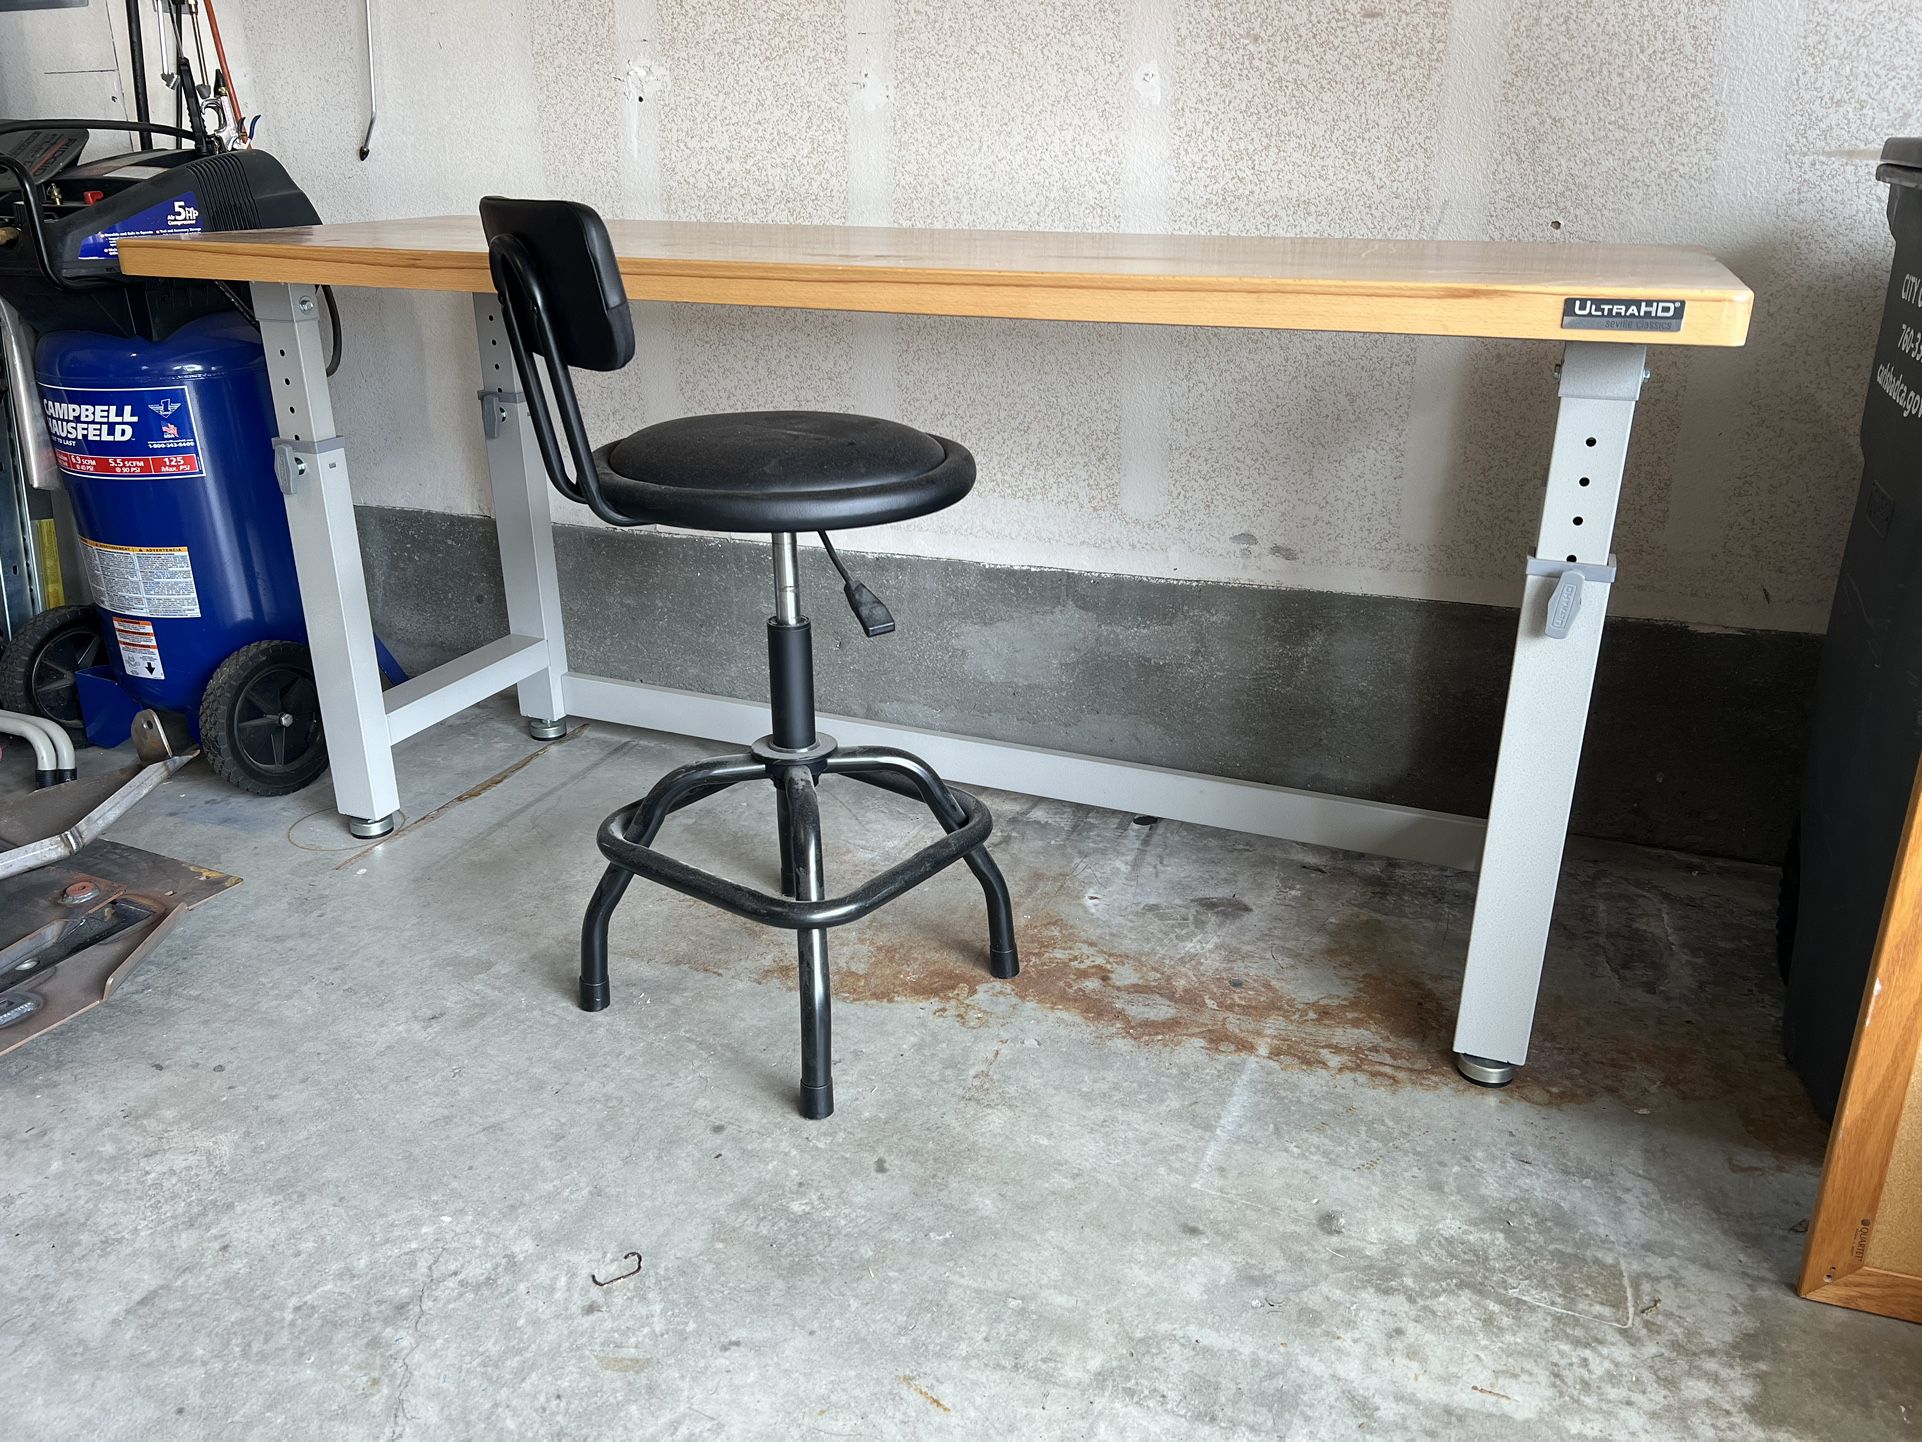 Adjustable height workbench with chair.